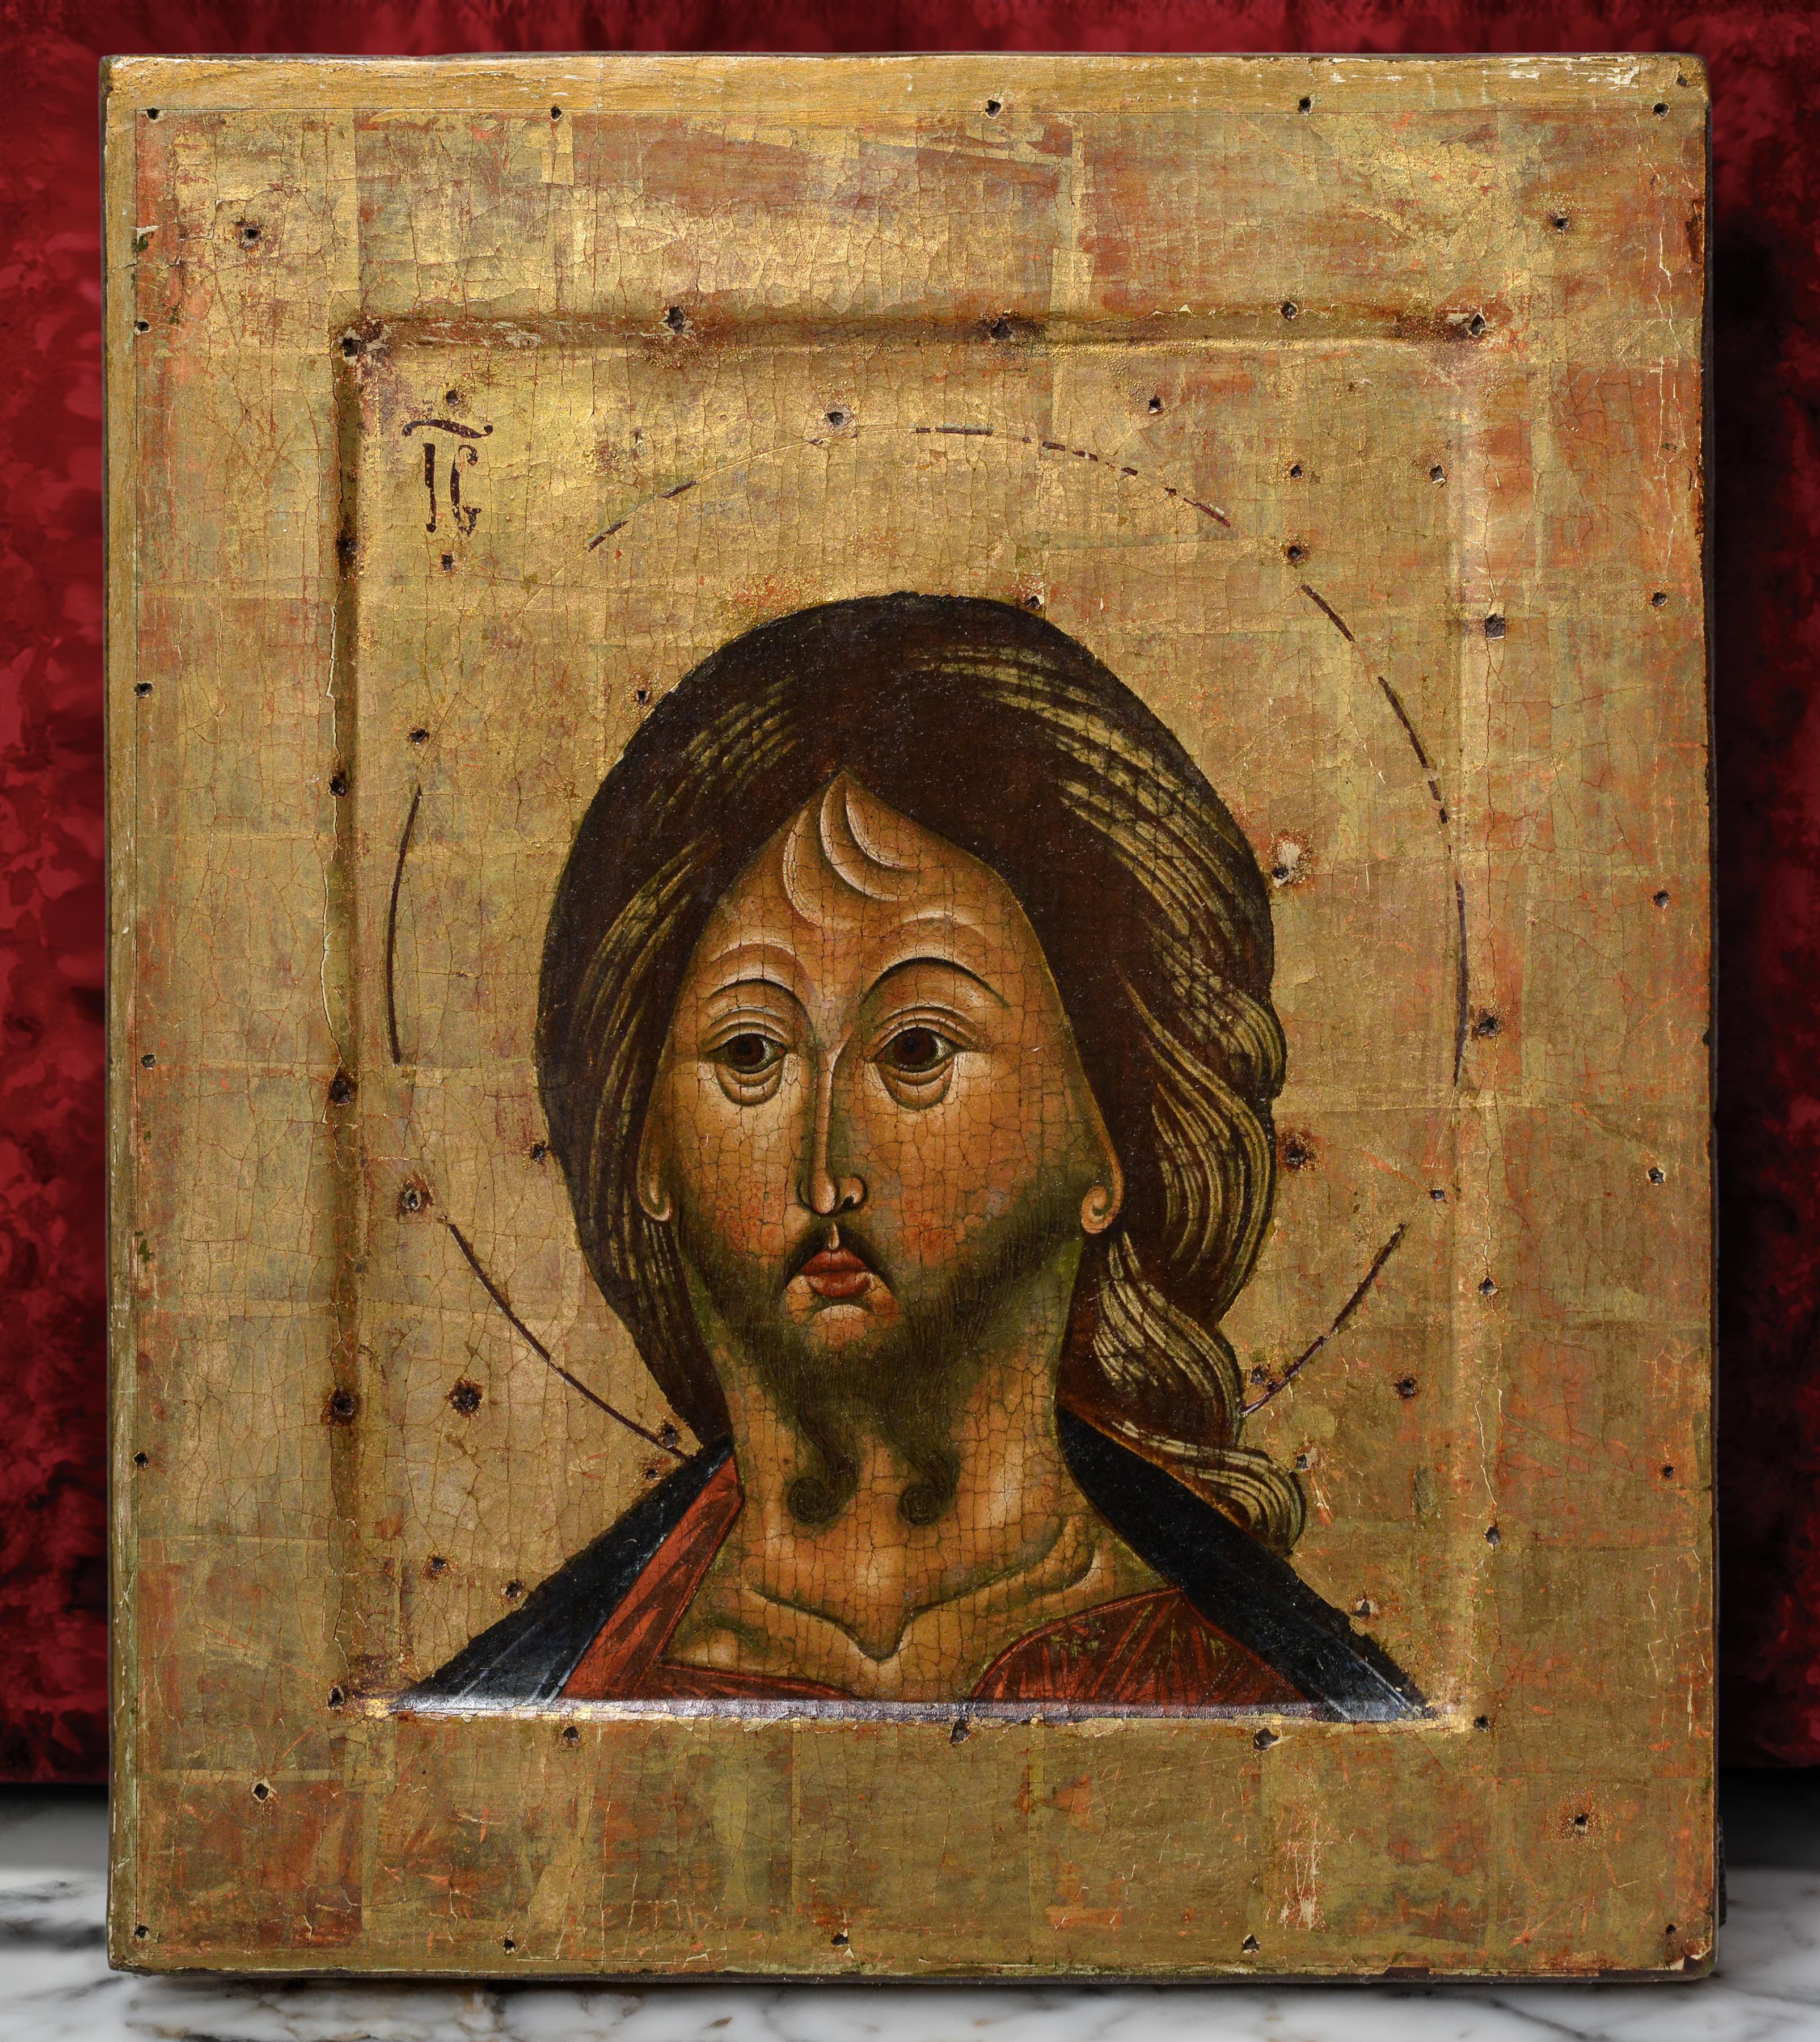 This scarce depiction of Jesus Christ was painted presumably in Moscow in early 19th century. The icon is painted in the author's (improvisational) manner, which differs from the recognized canonical school of iconography. Icons belongs to the